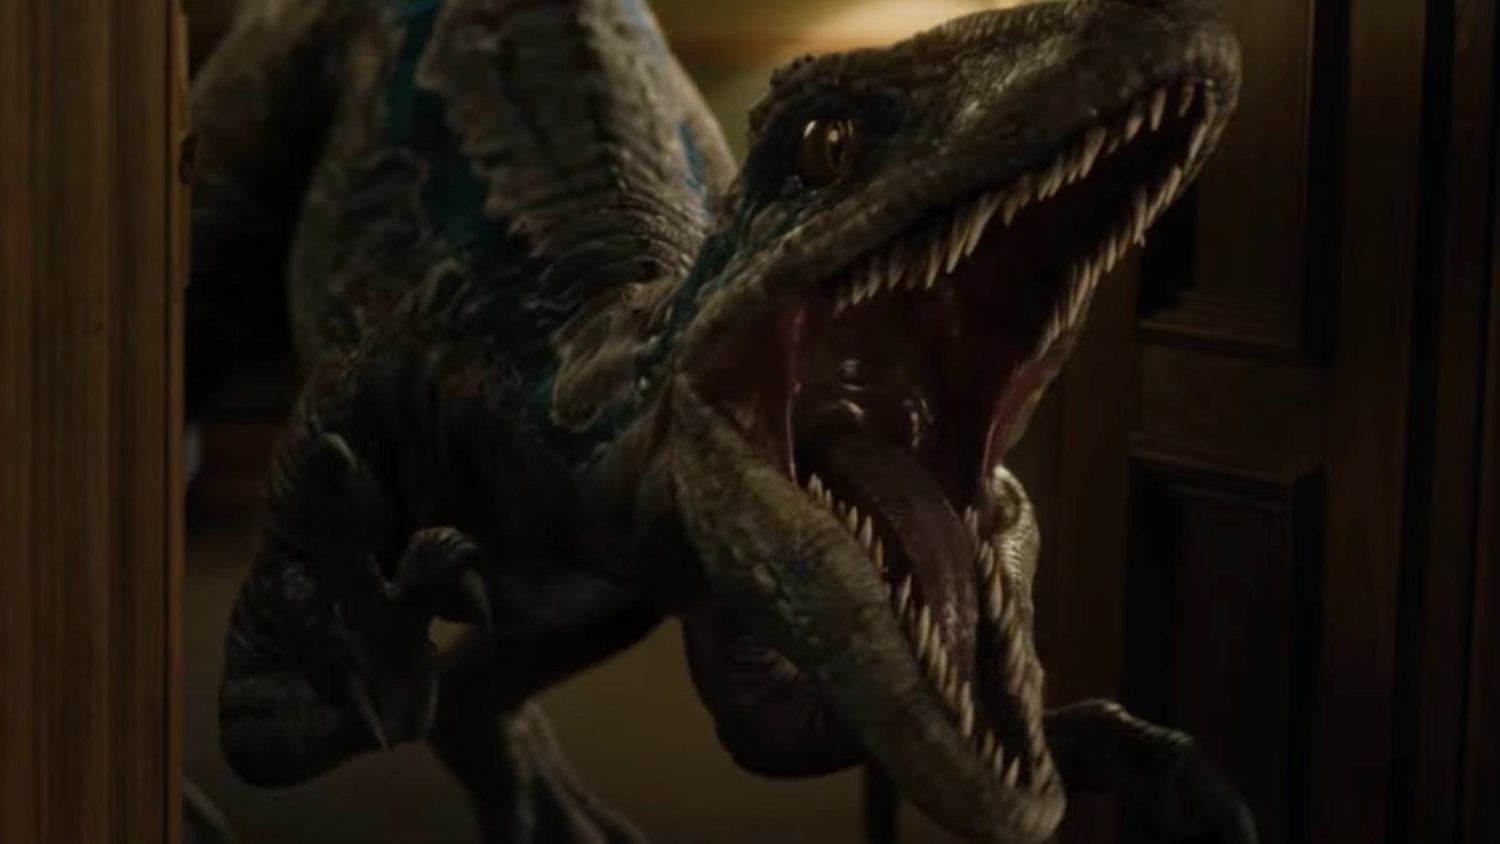 Blue and The Indoraptor Fight in TV Spot For JURASSIC WORLD: FALLEN KINGDOM and There's a New Poster!